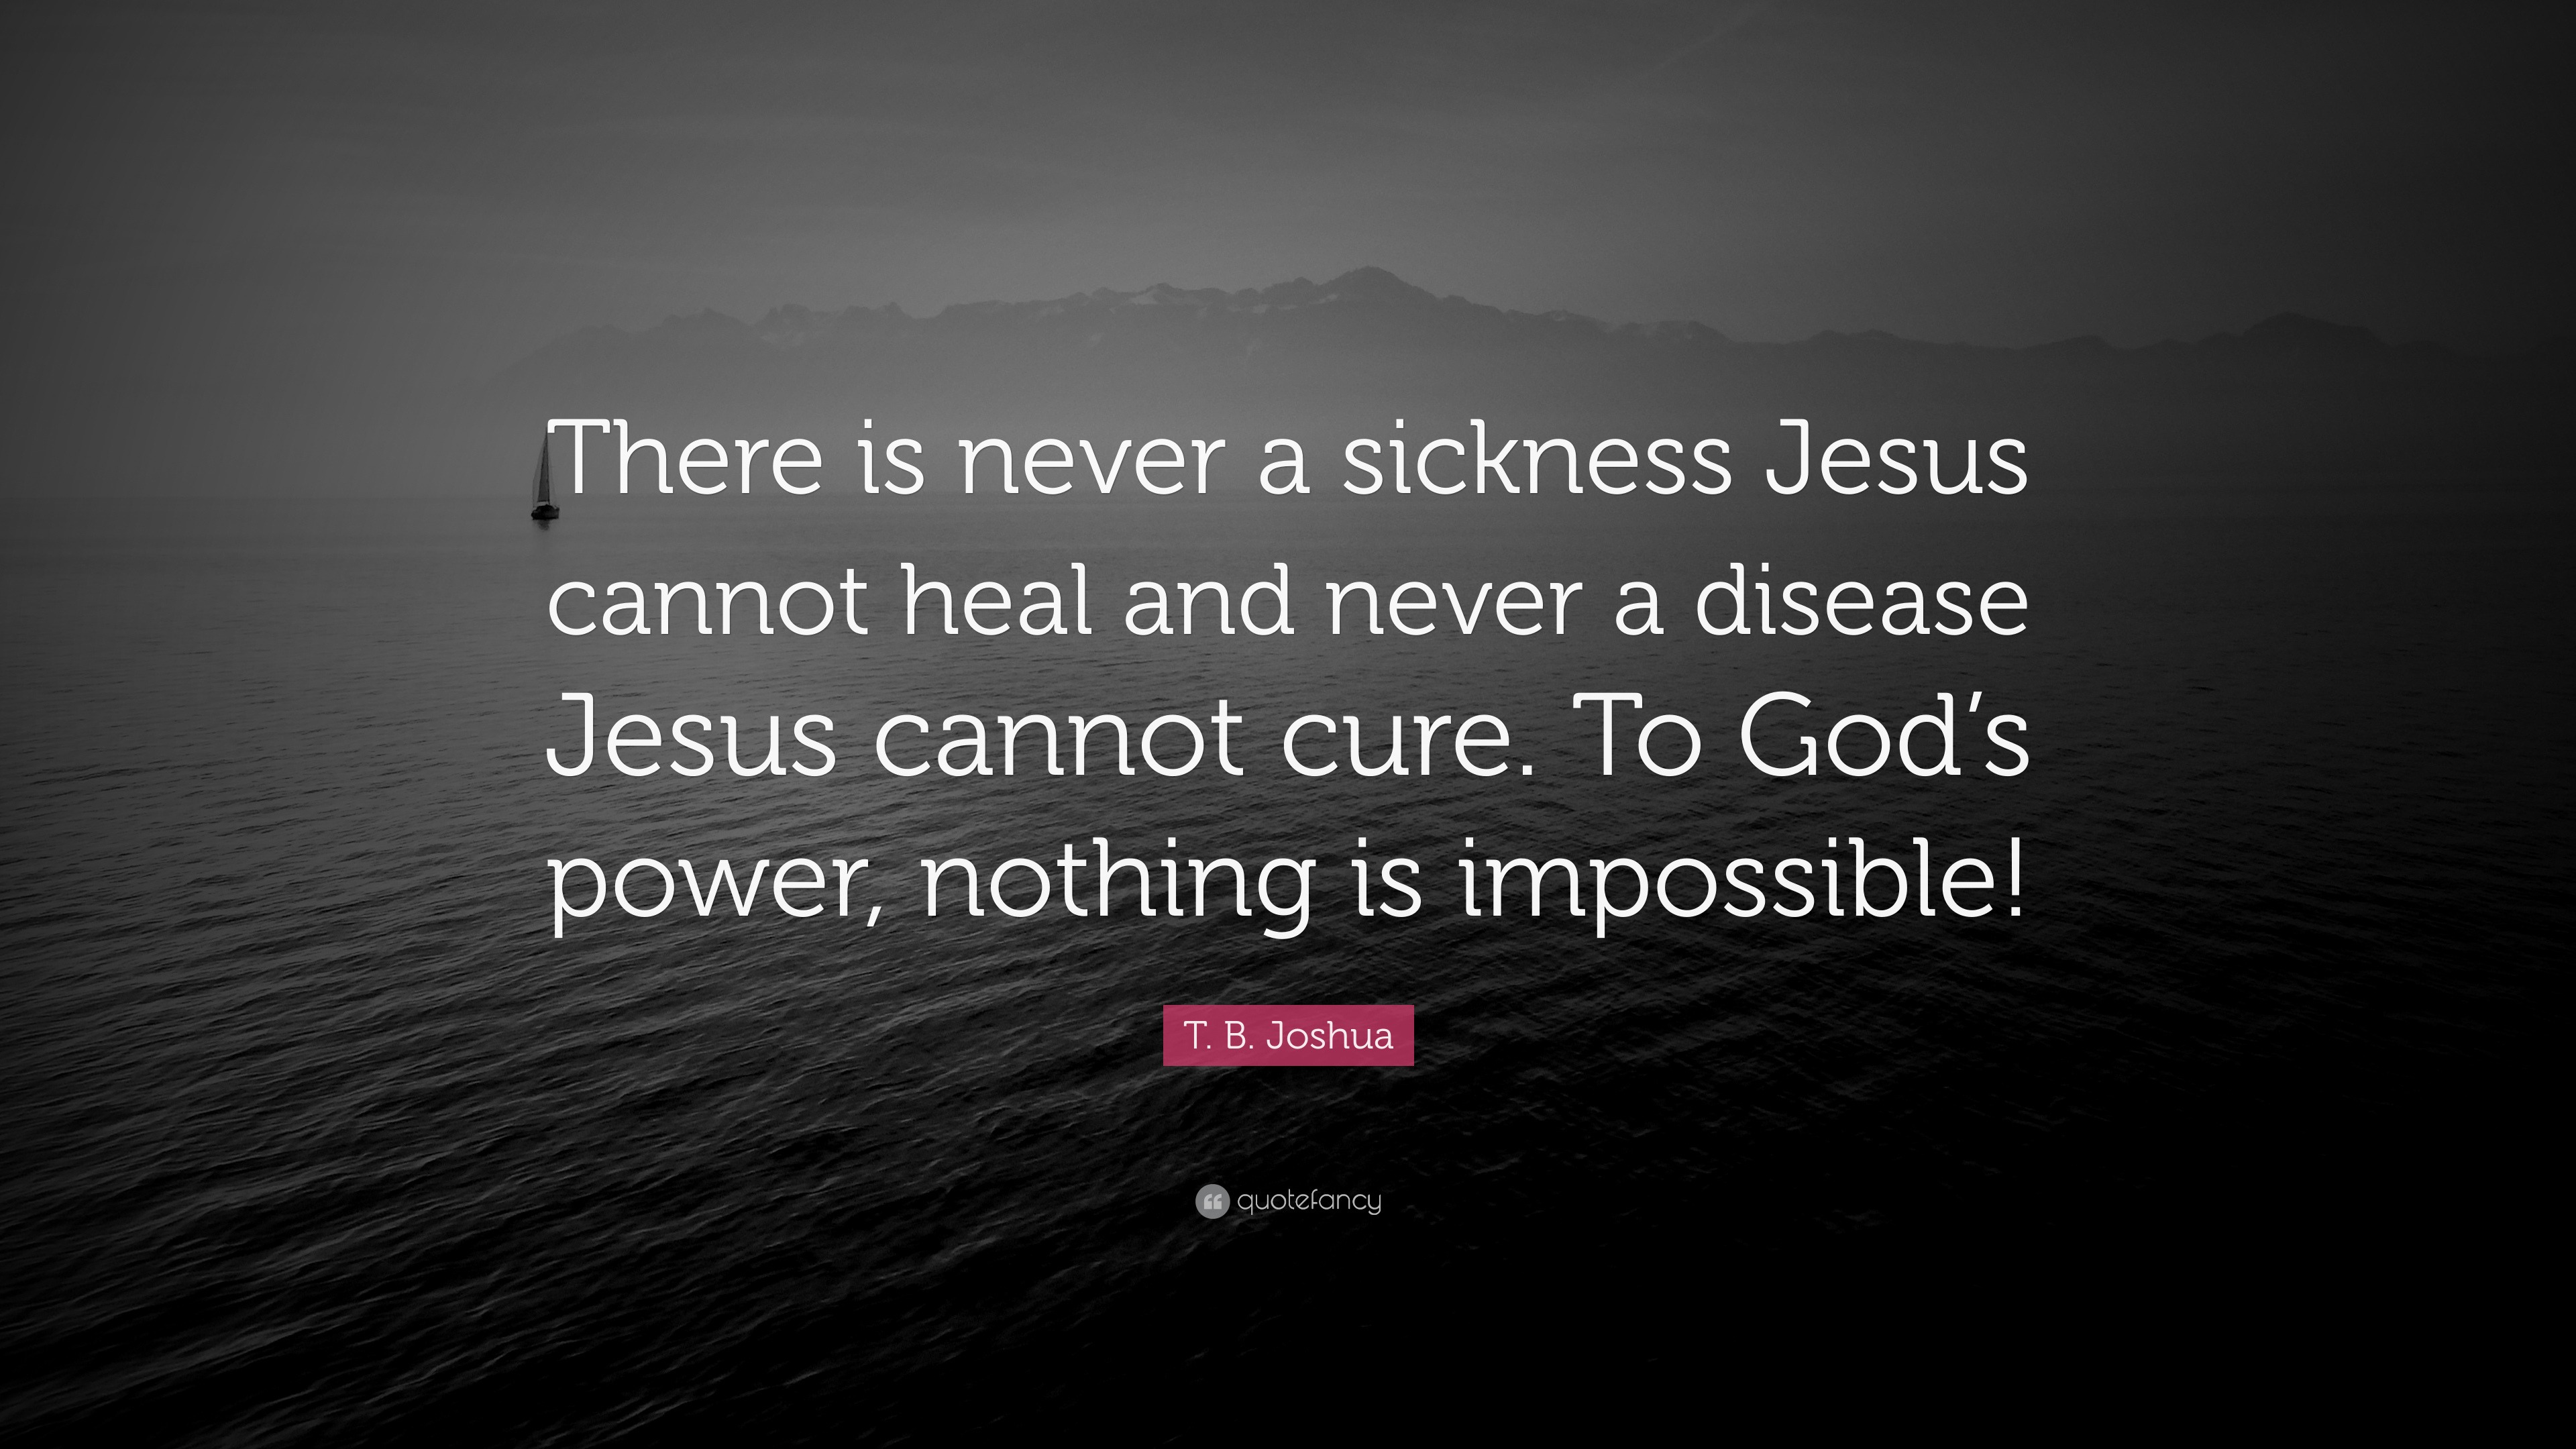 T B Joshua Quote There Is Never A Sickness Jesus Cannot Heal And Never A Disease Jesus Cannot Cure To God S Power Nothing Is Impossible